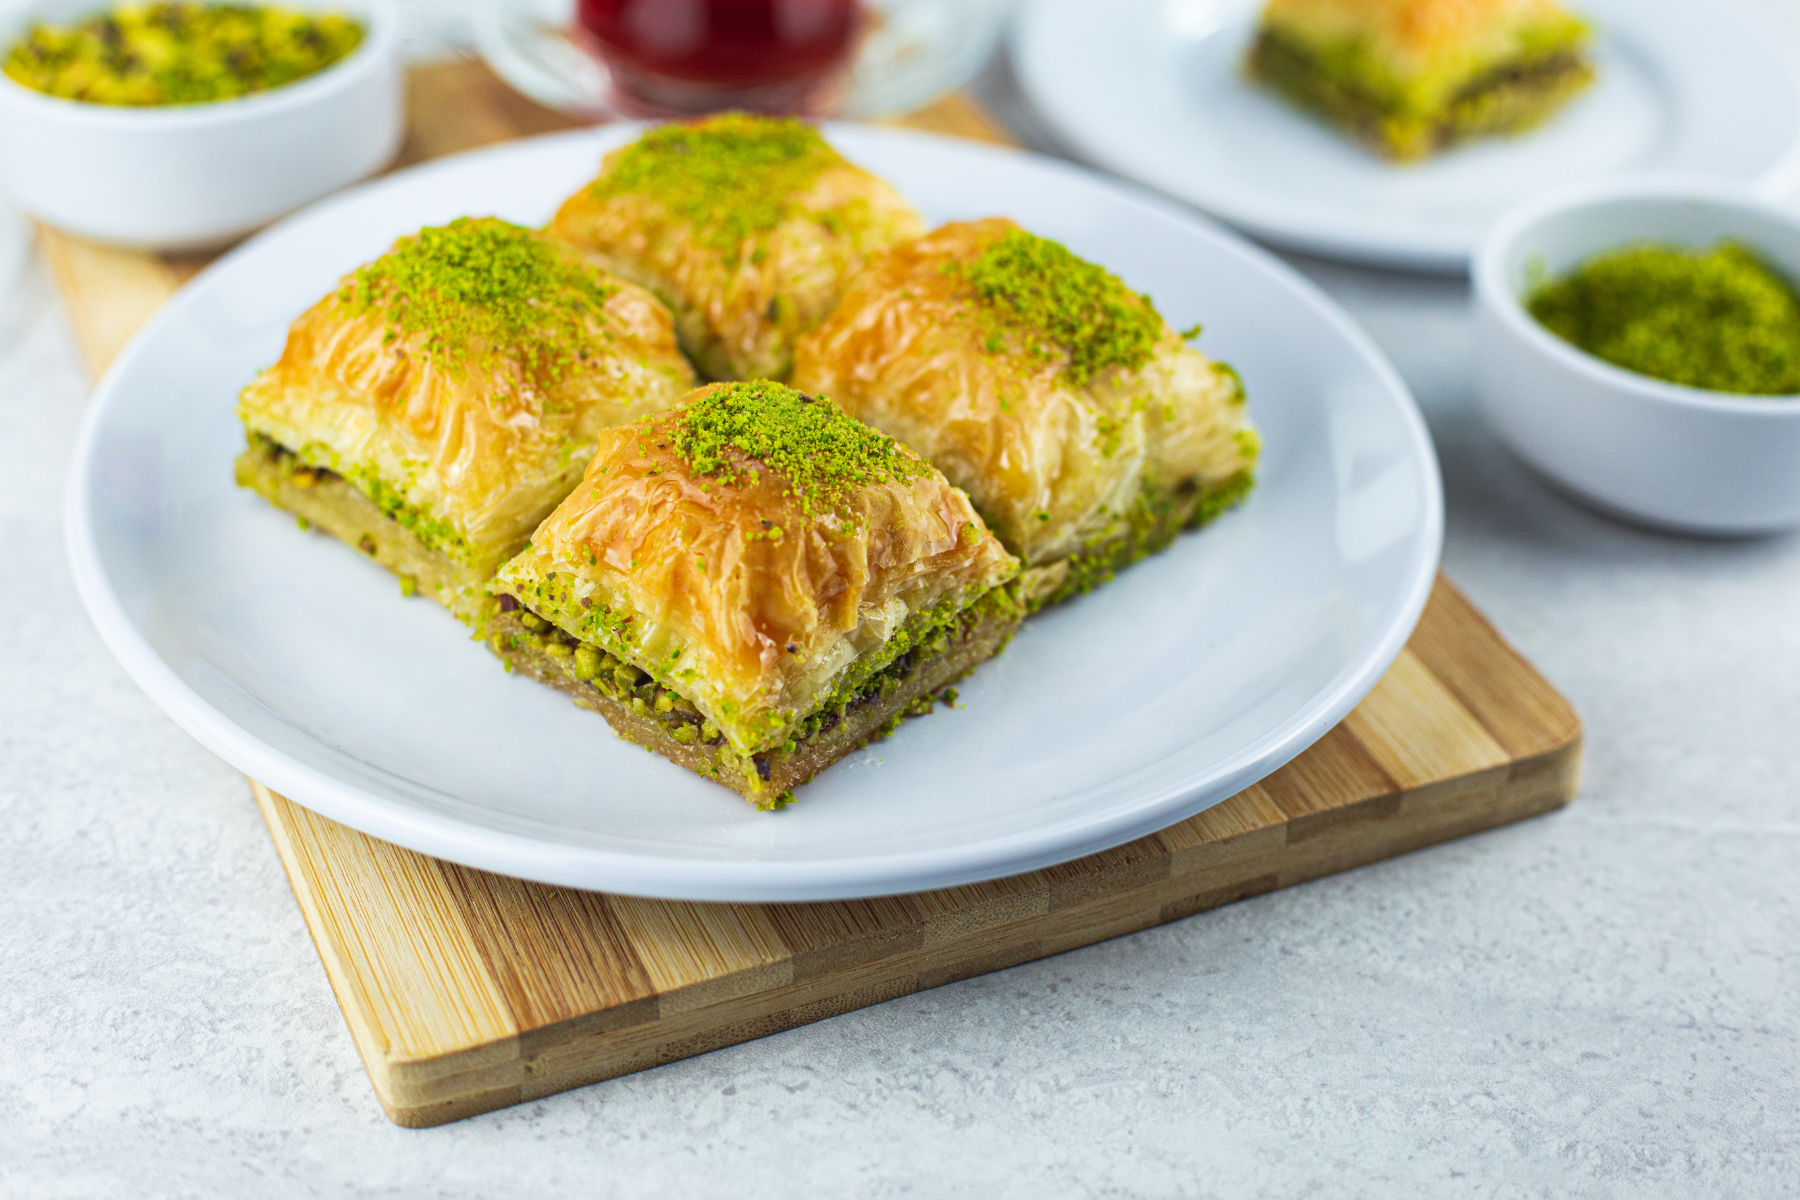 A plate of pistachio paste infused baklava, a sweet pastry dessert.